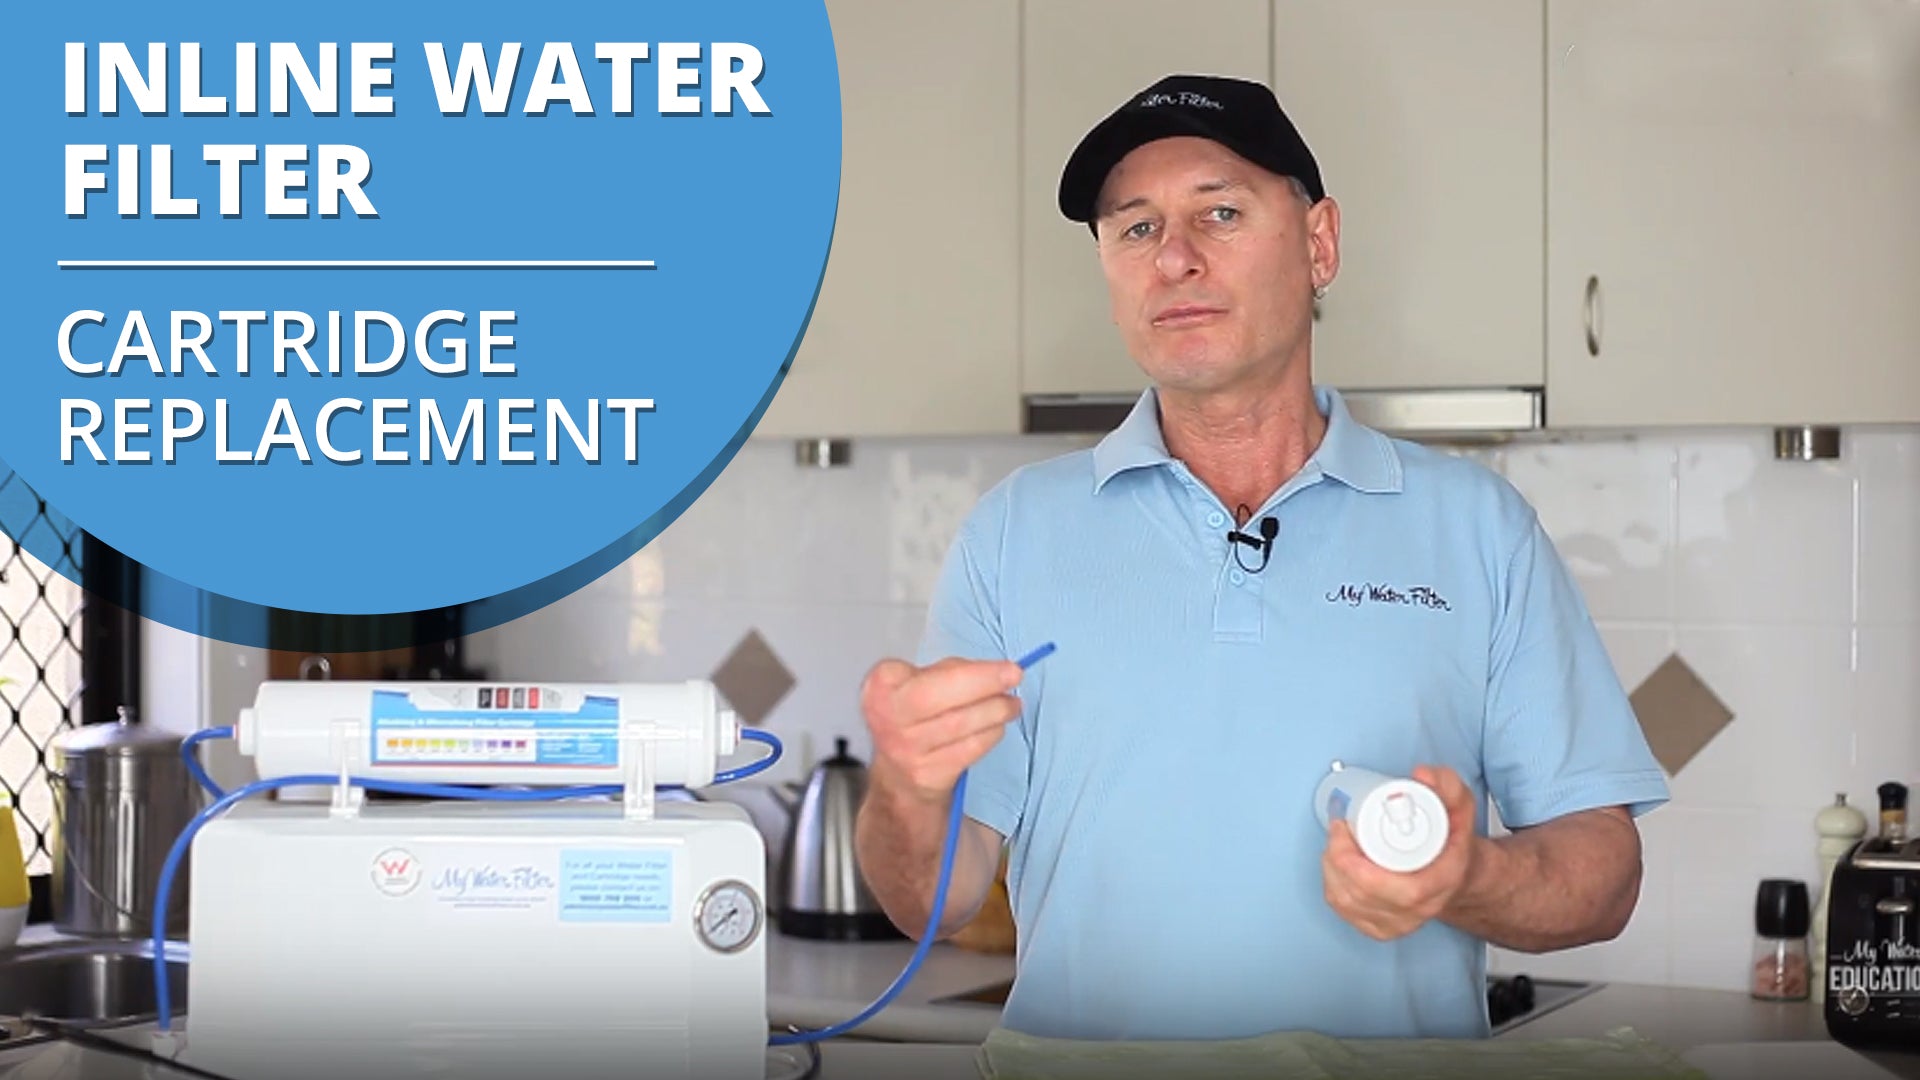 How to Install or replace an Inline Water Filter Cartridge [VIDEO]